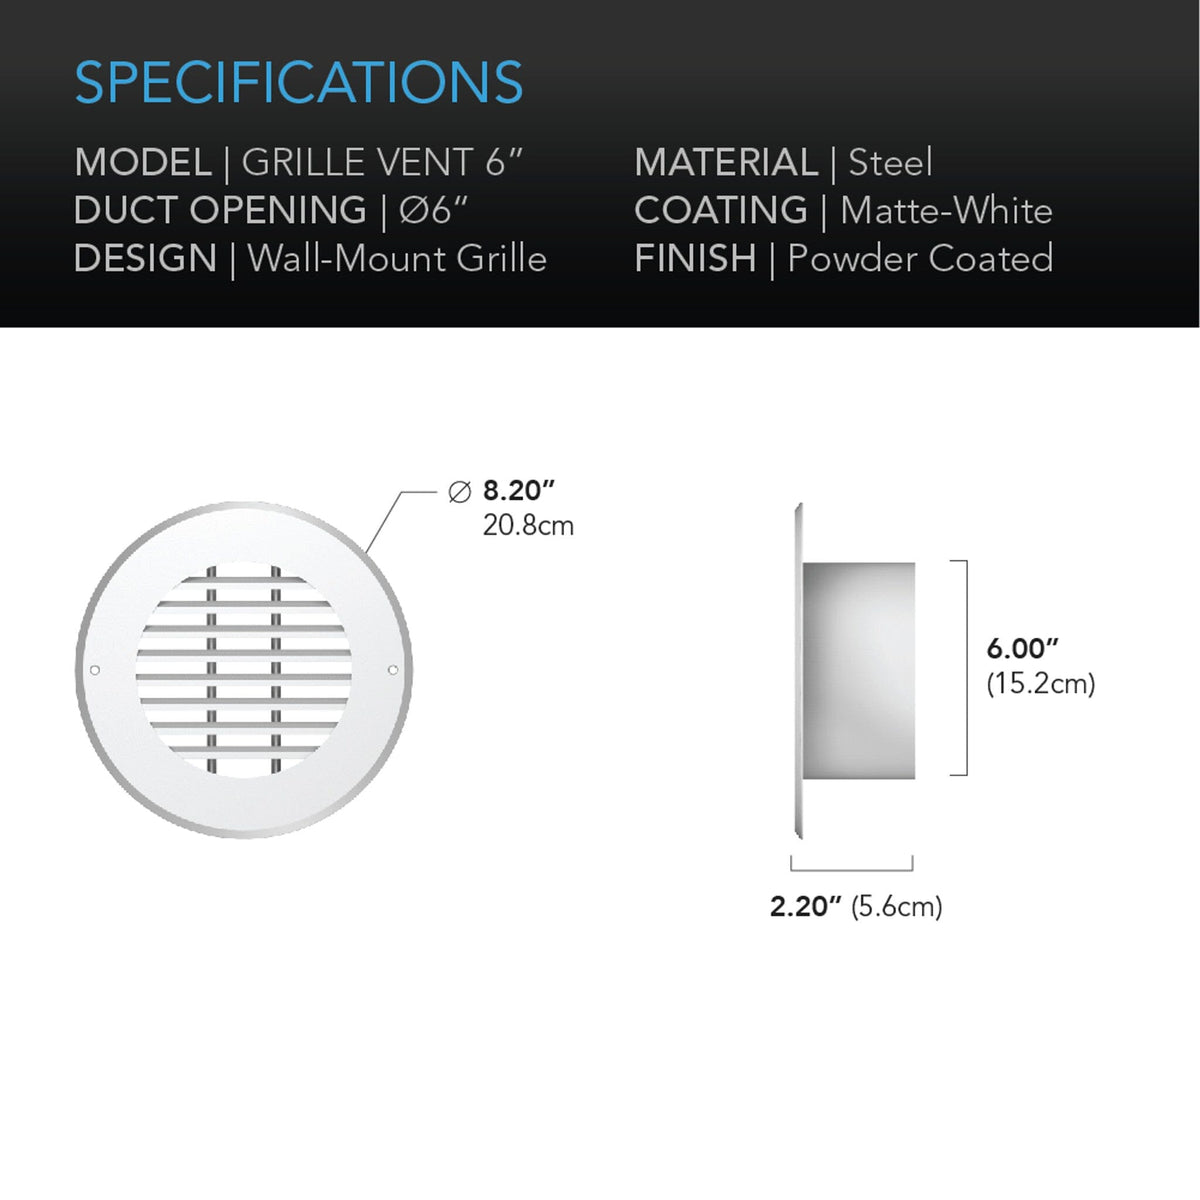 Wall-Mount Duct Grille Vent 6 inch specifications